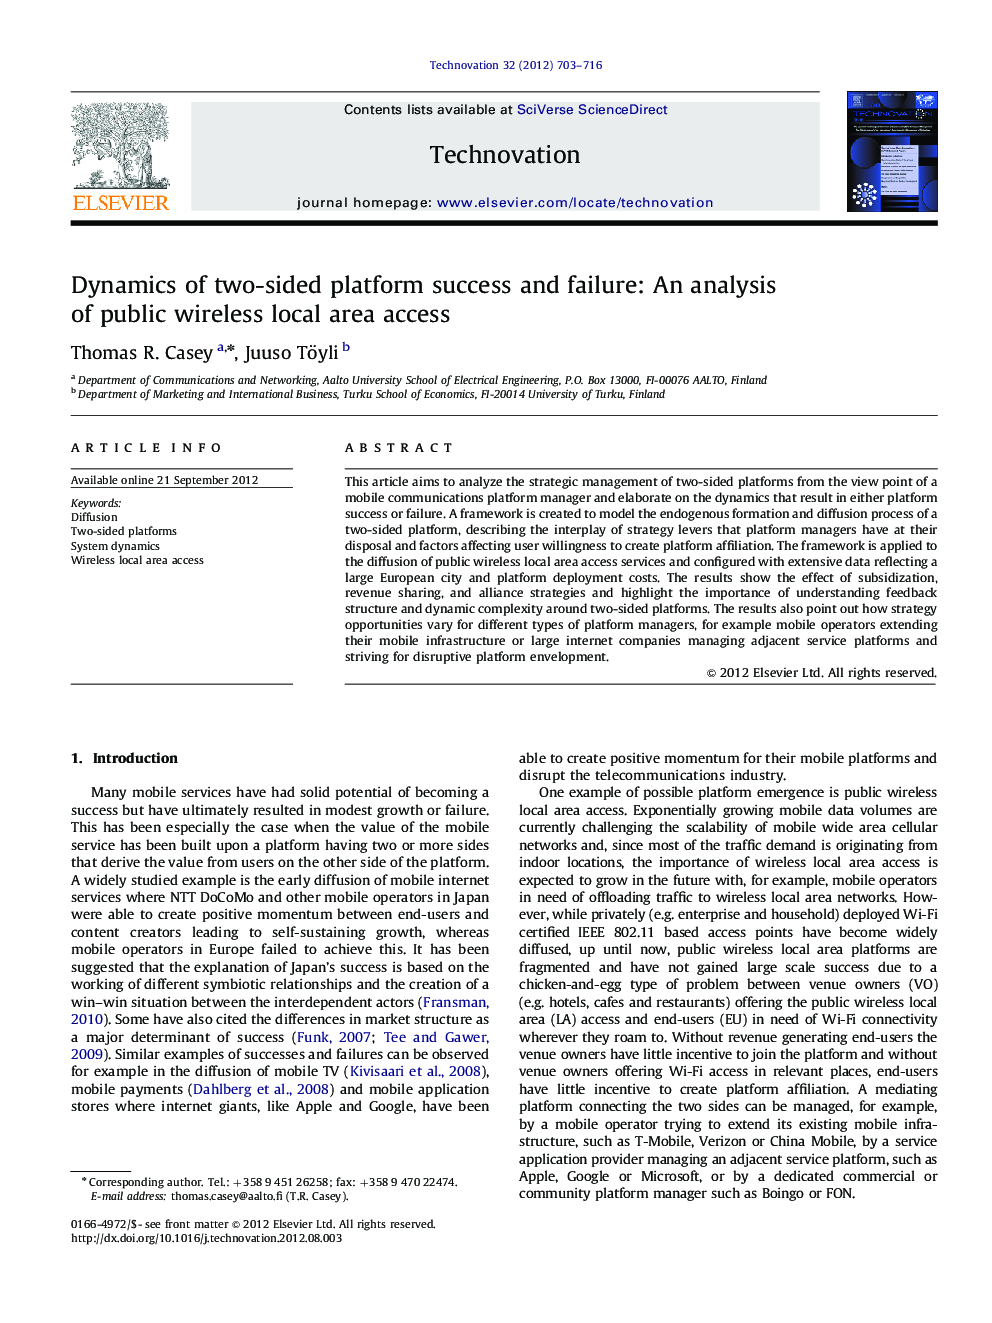 Dynamics of two-sided platform success and failure: An analysis of public wireless local area access